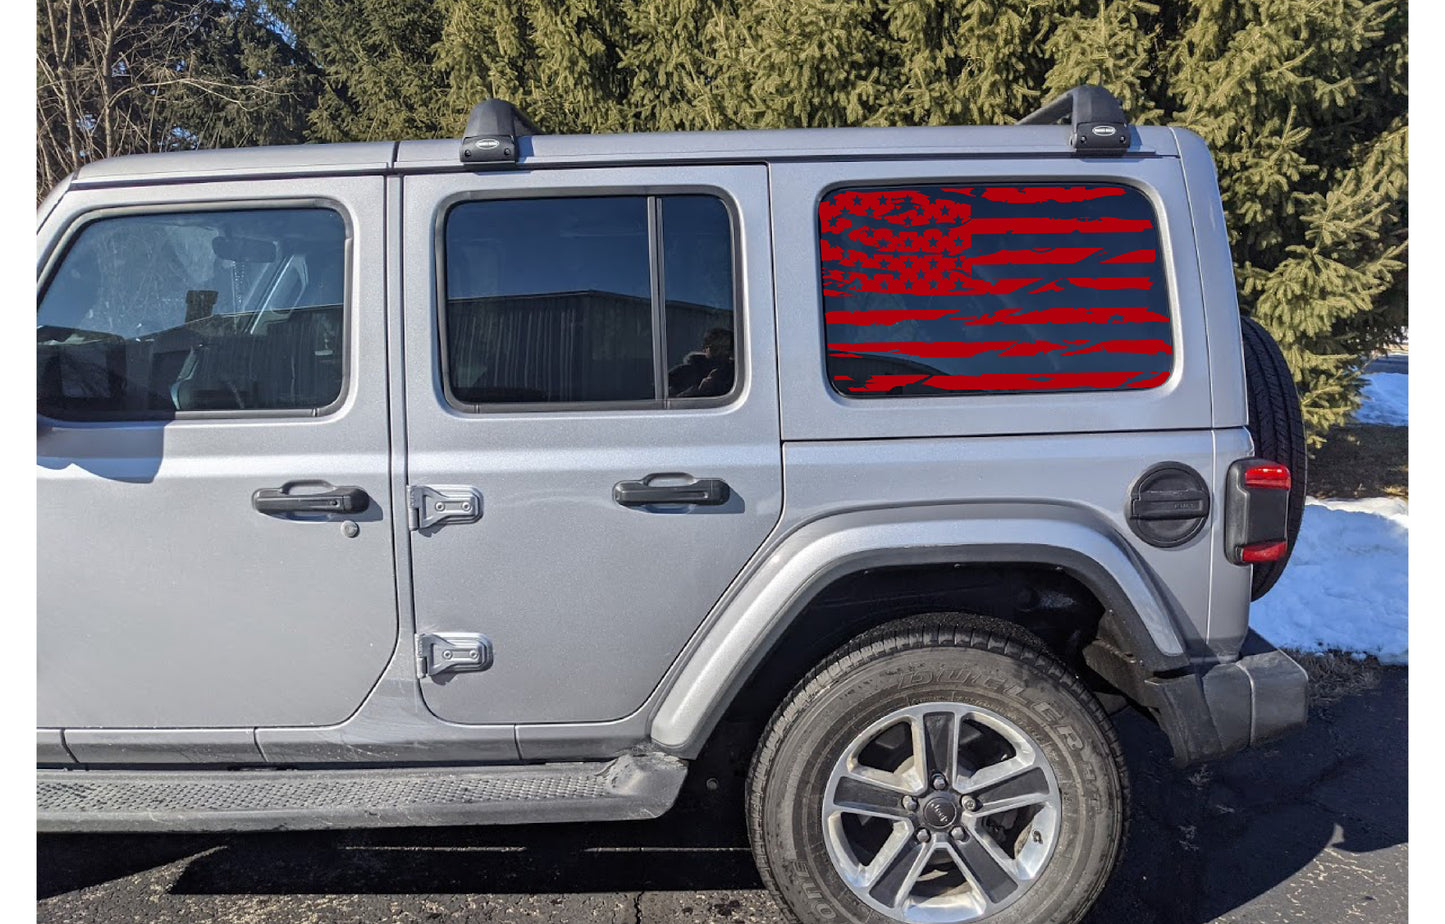 Distressed USA American Flag Rear Window Decal- Fits Jeep Wrangler JL